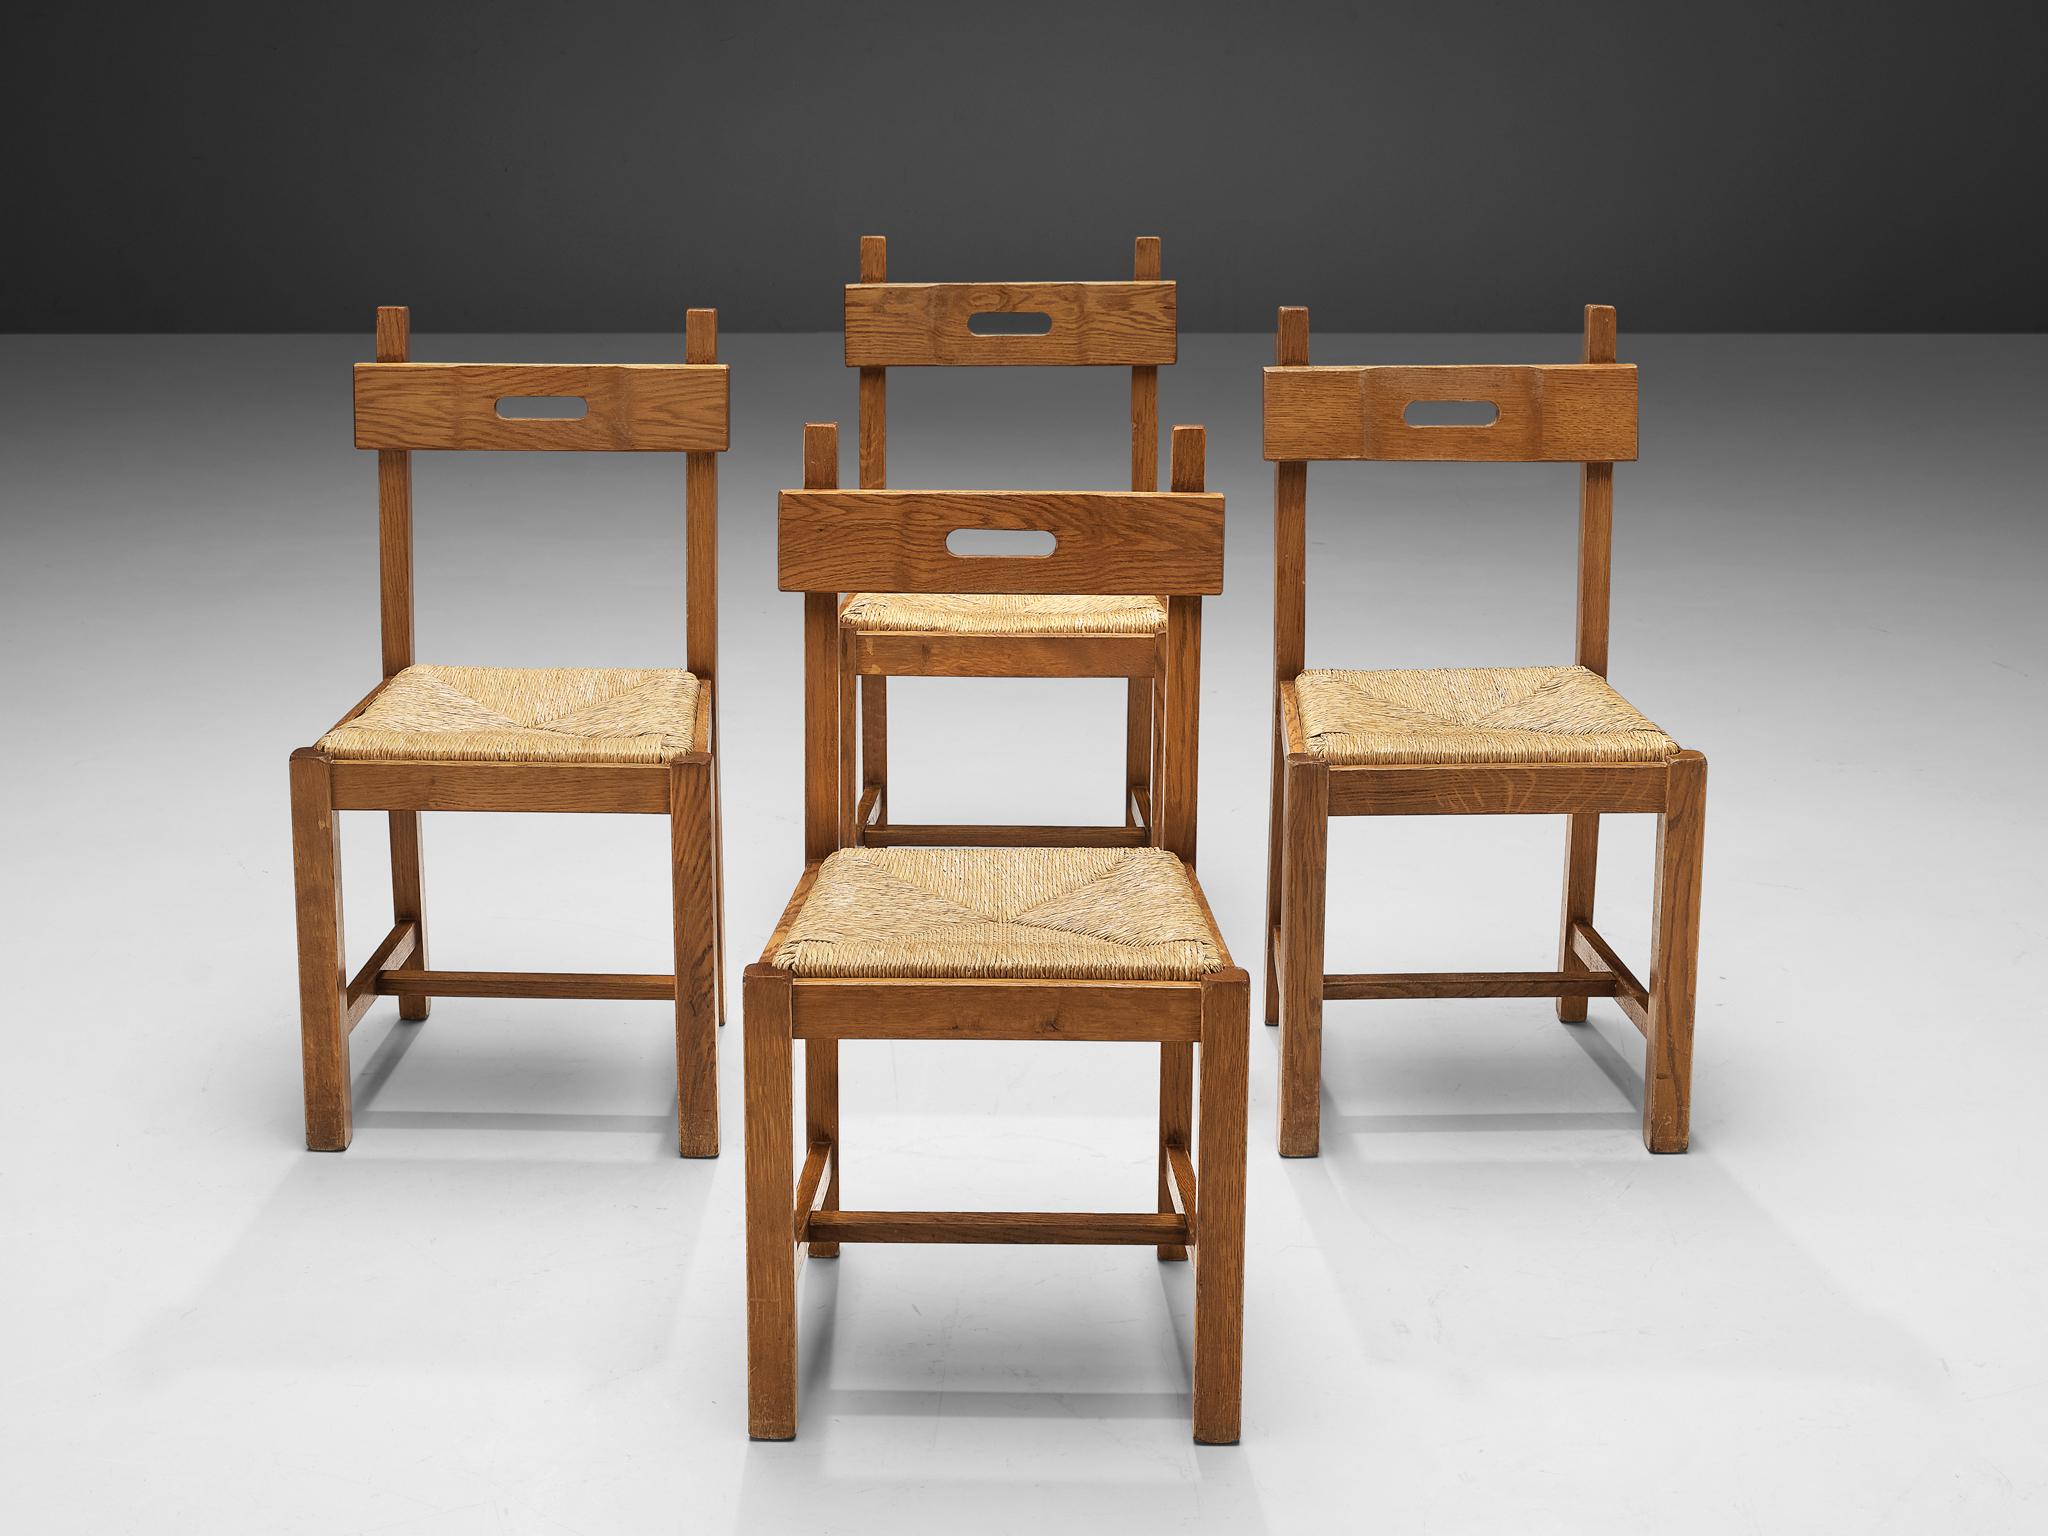 Set of four dining chairs, oak, straw, Belgium, 1960s.

These chairs are executed in oak which has gained a rich patina over time and a seat of straw. The chairs have a very solid and geometrical backrest. The chairs are both functional and clear in